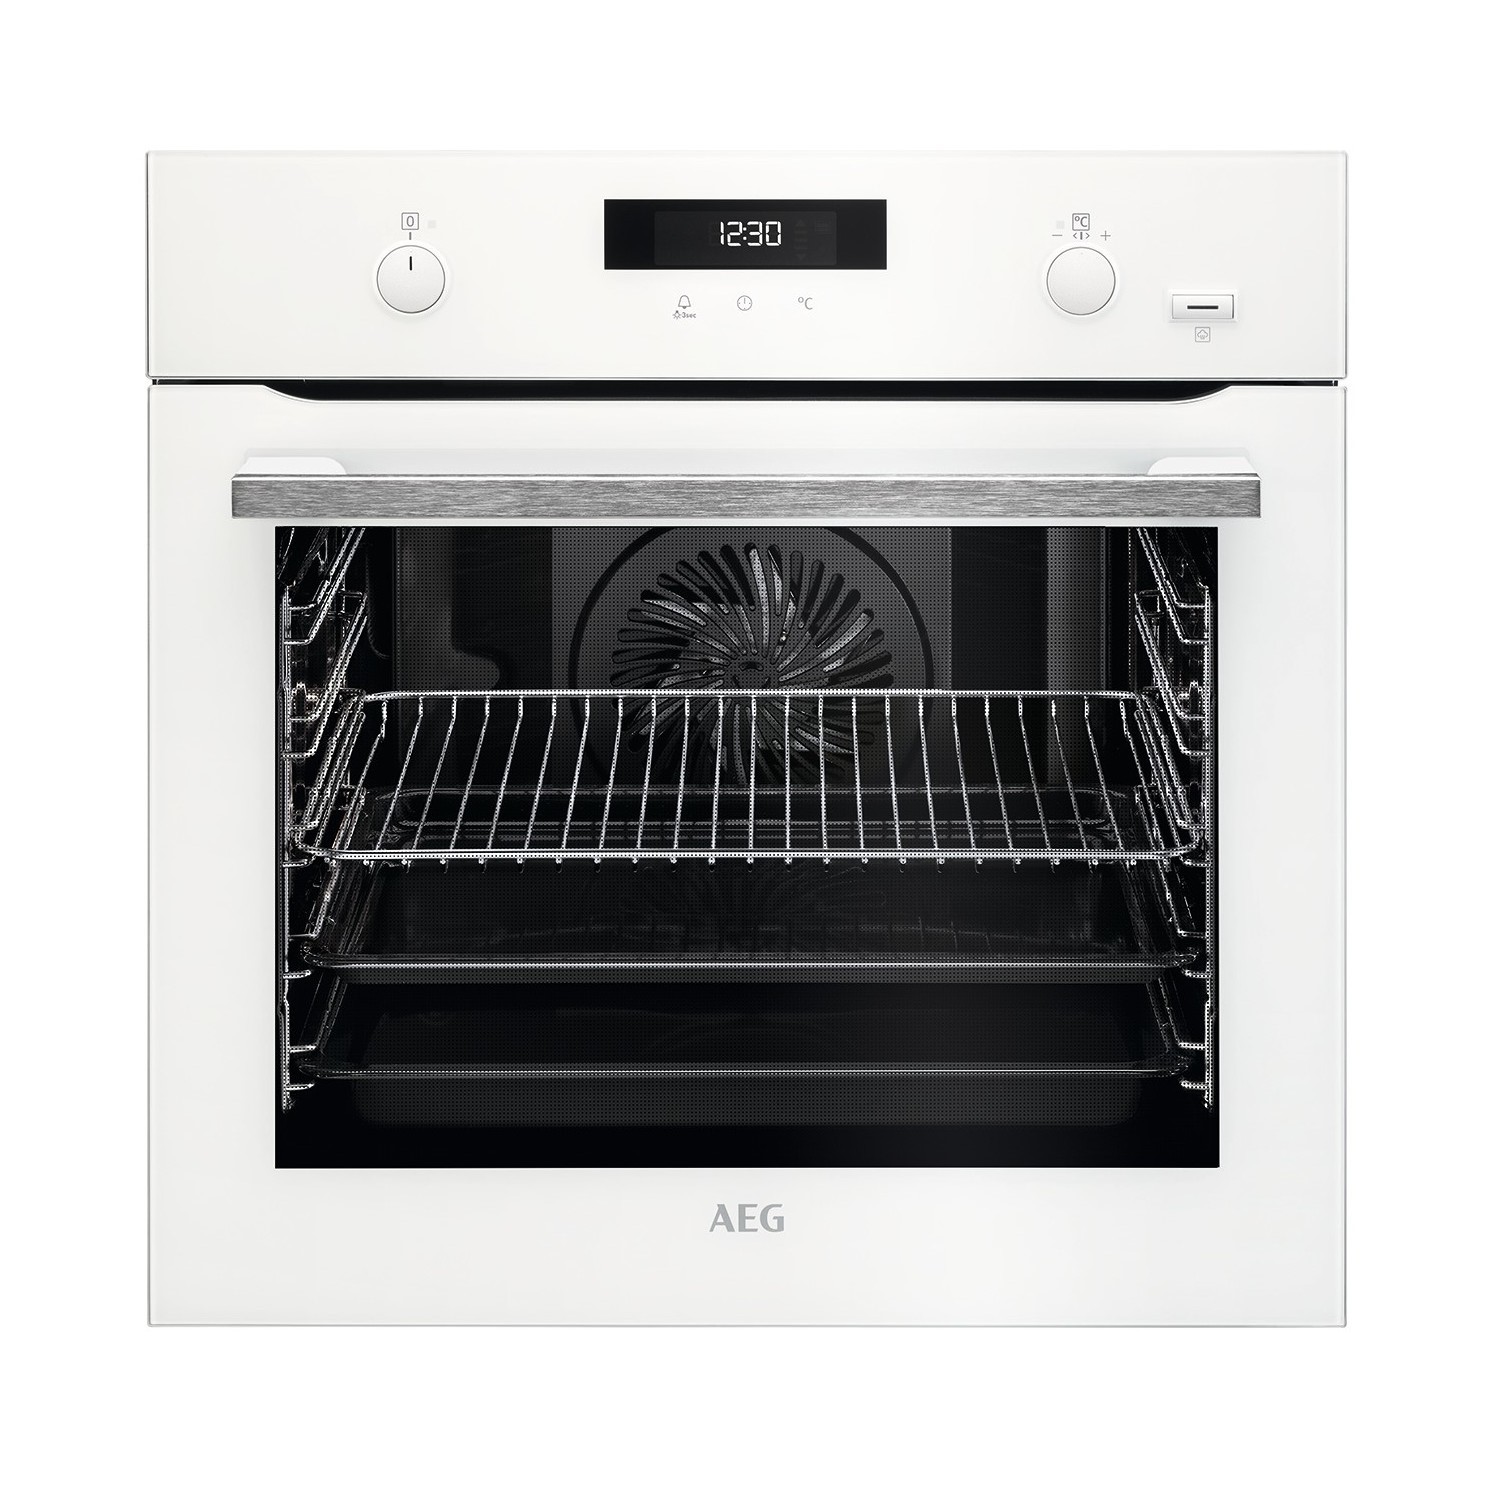 Refurbished AEG BPS555020W 60cm Single Built In Electric Oven